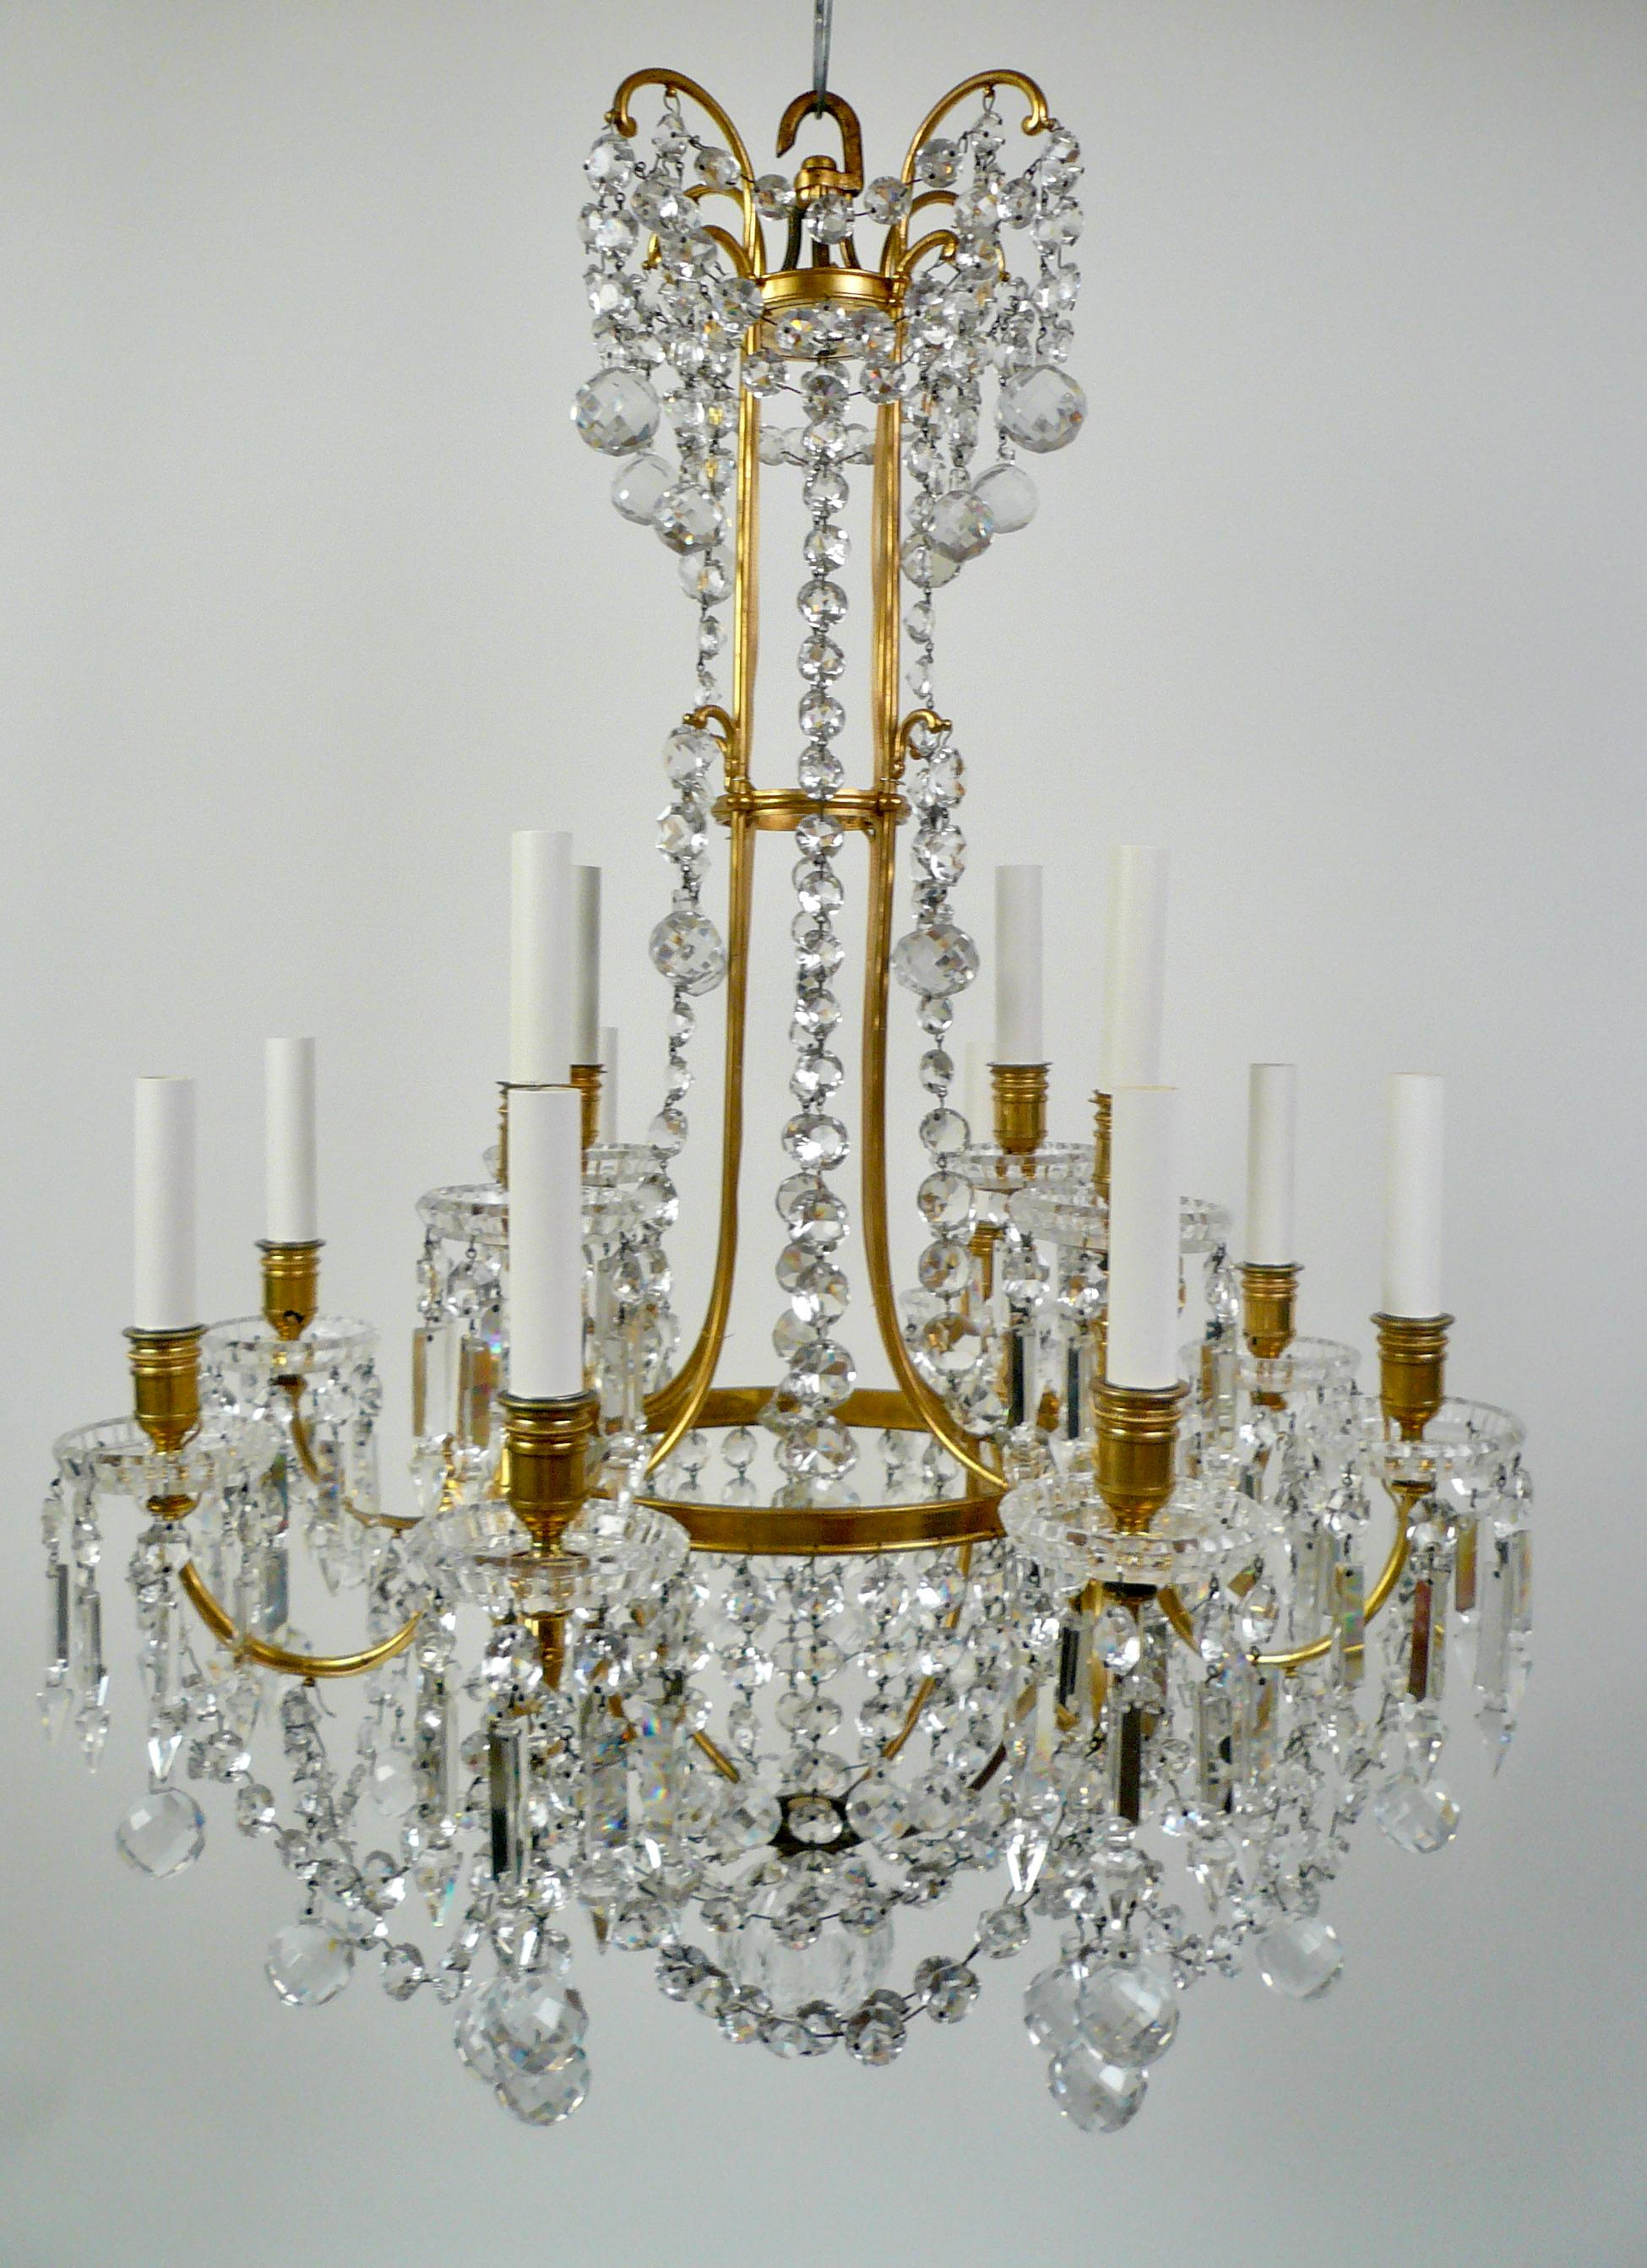 Signed Baccarat Gilt Bronze and Crystal 12 Light Chandelier, circa 1890 For Sale 2